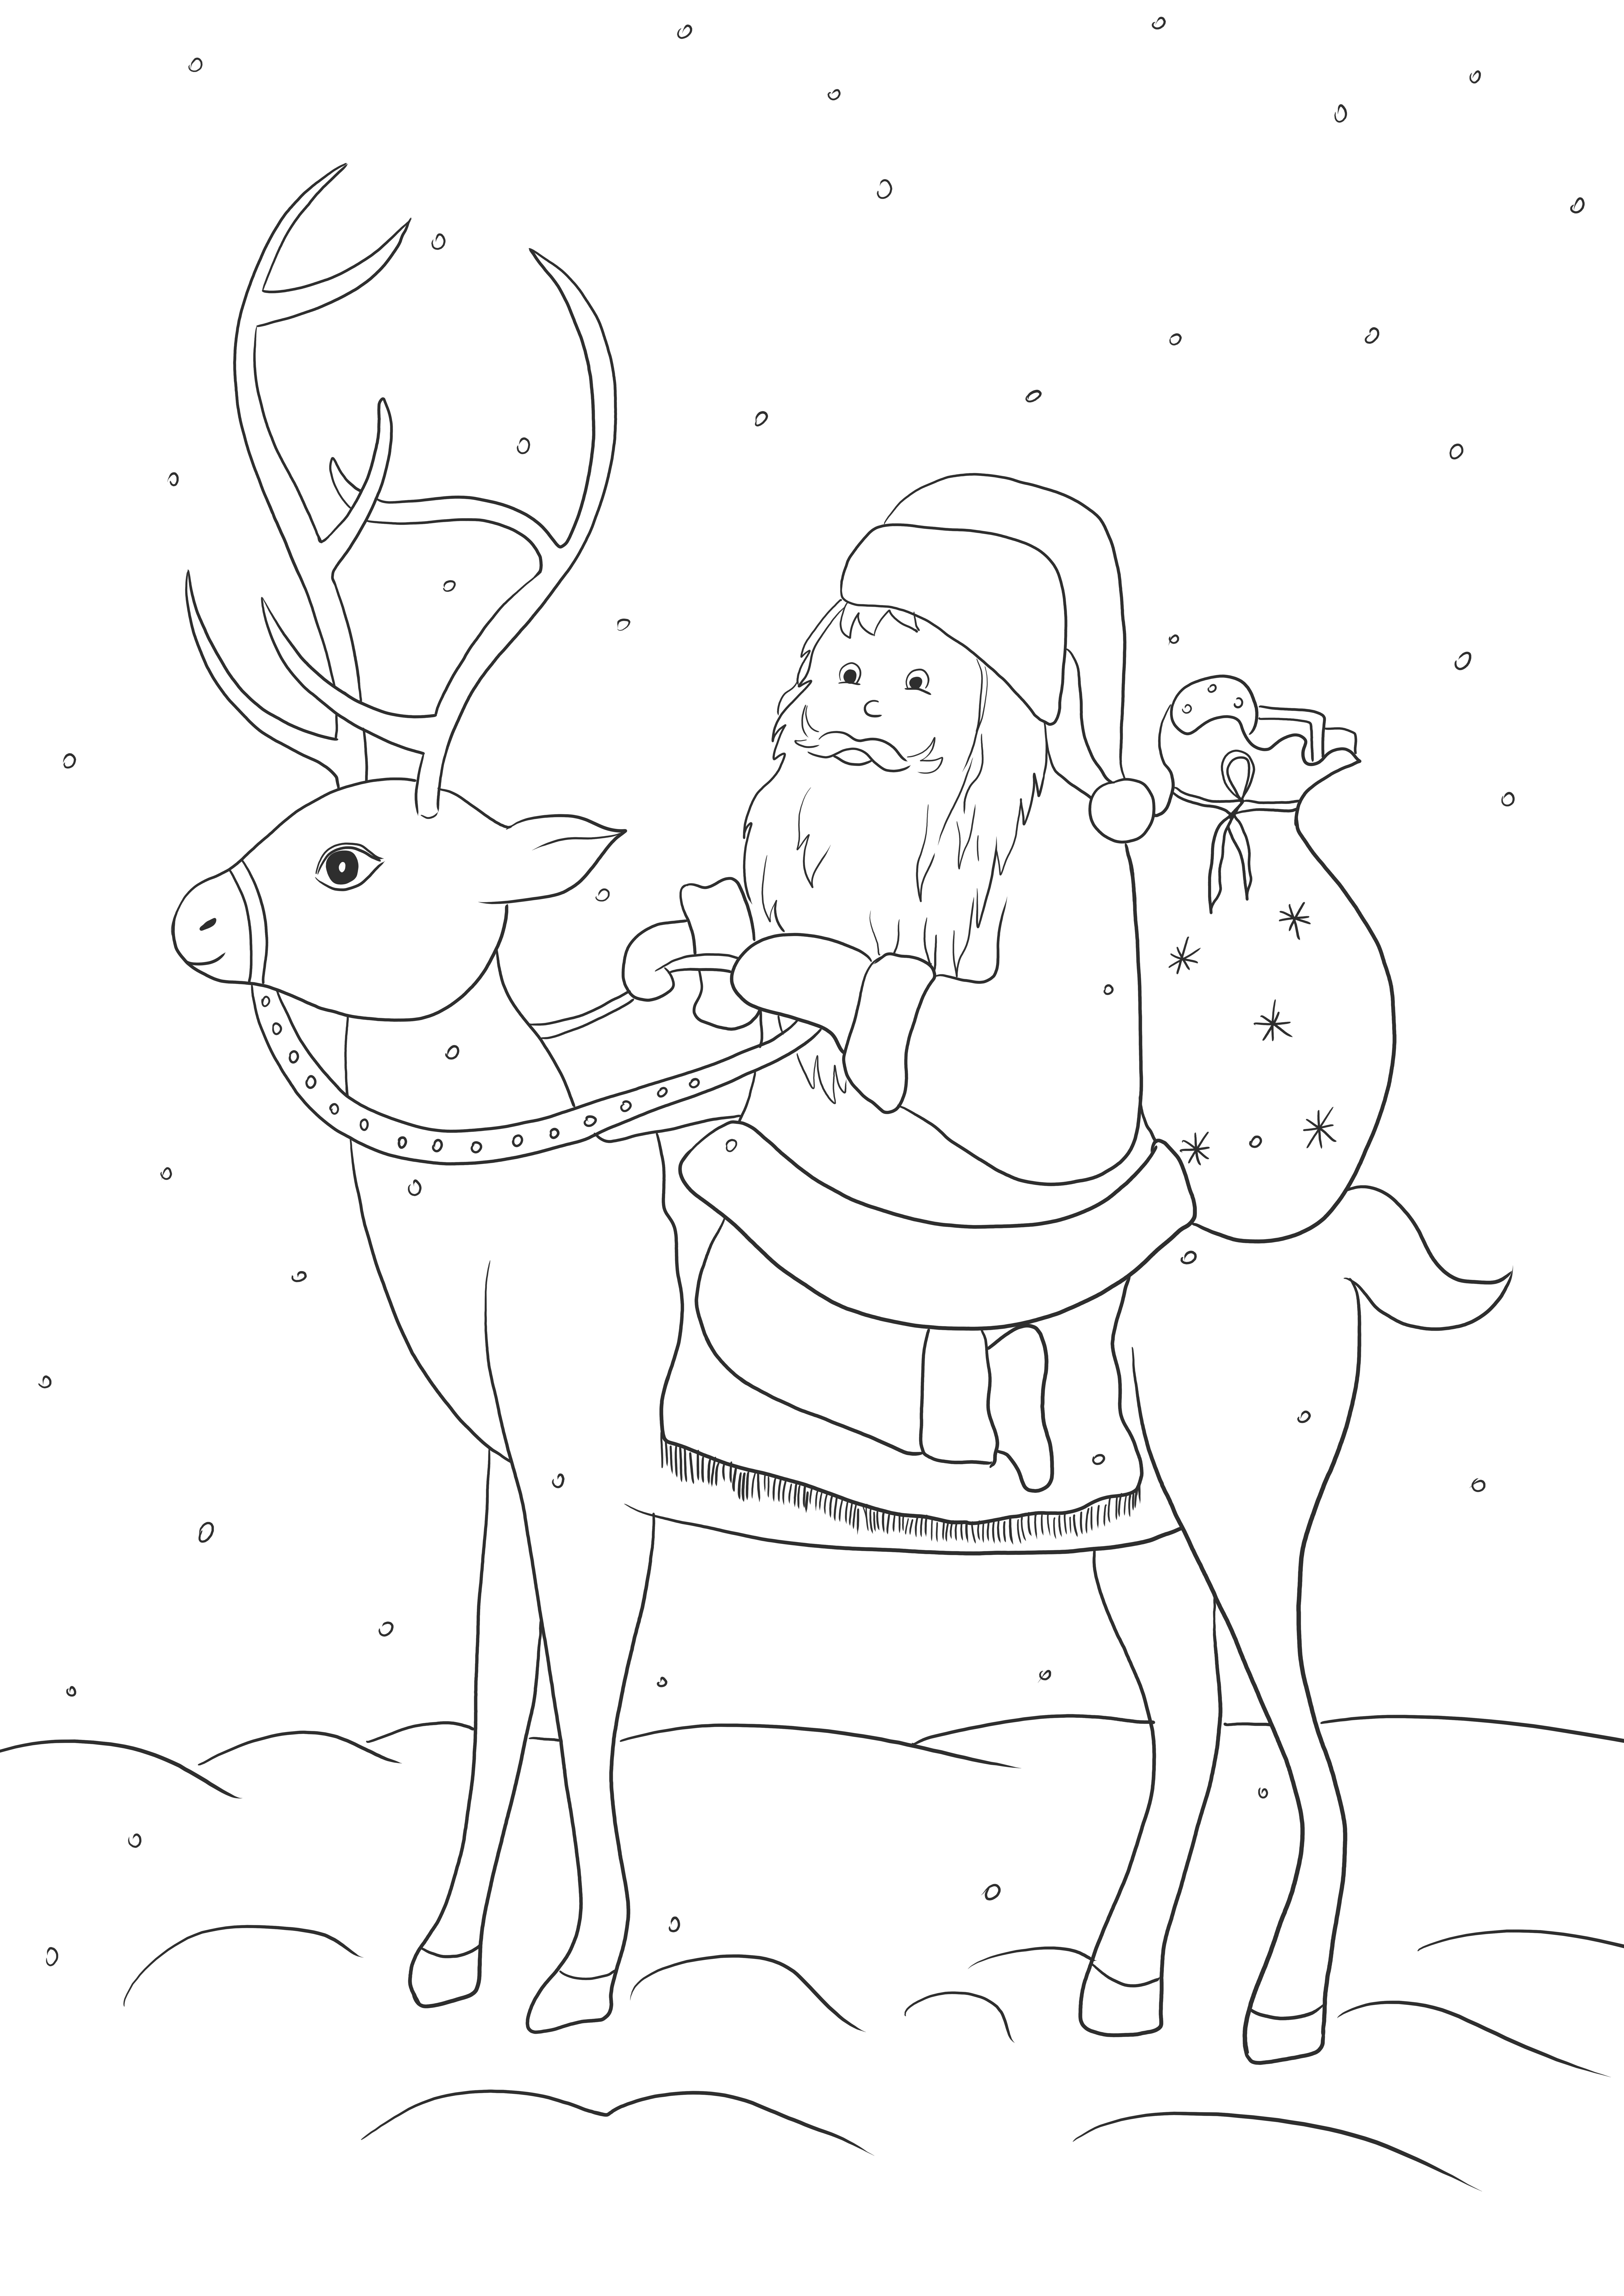 Santa Riding Reindeer printing image for free and coloring